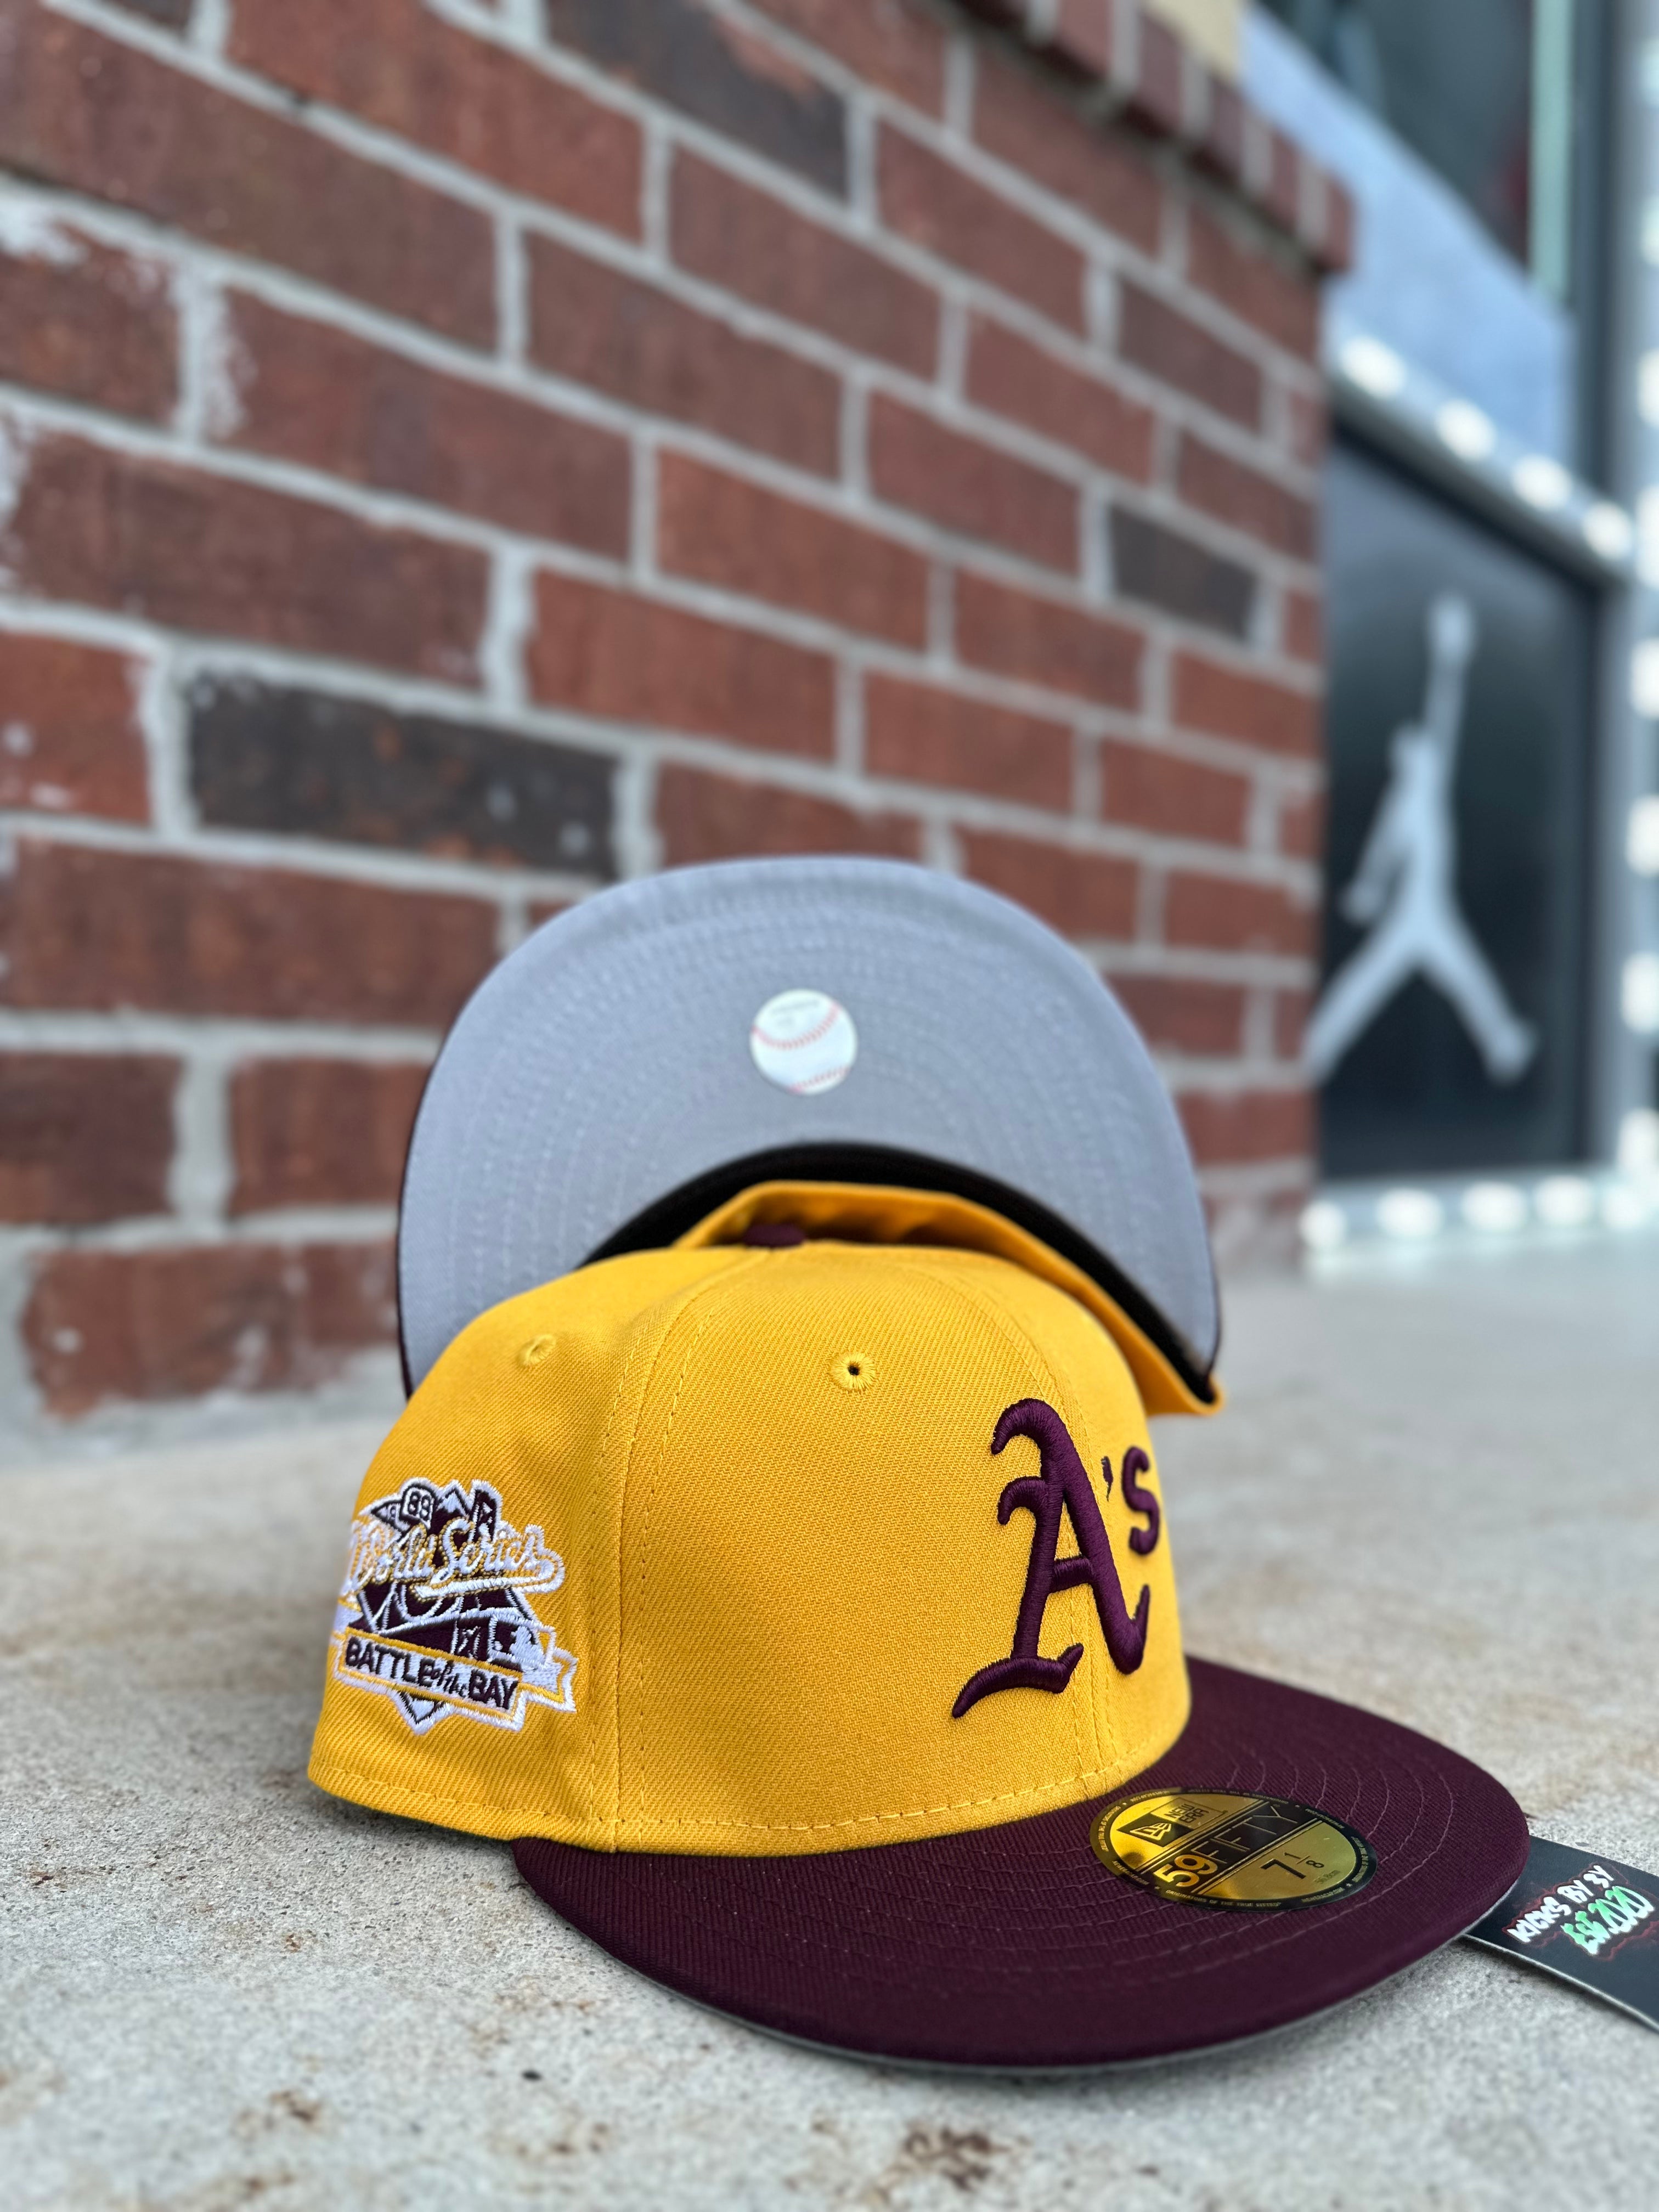 New Era 59 FIFTY Fitted "Oakland Athletics" 1989 World Series Battle of the Bay Gold/Maroon